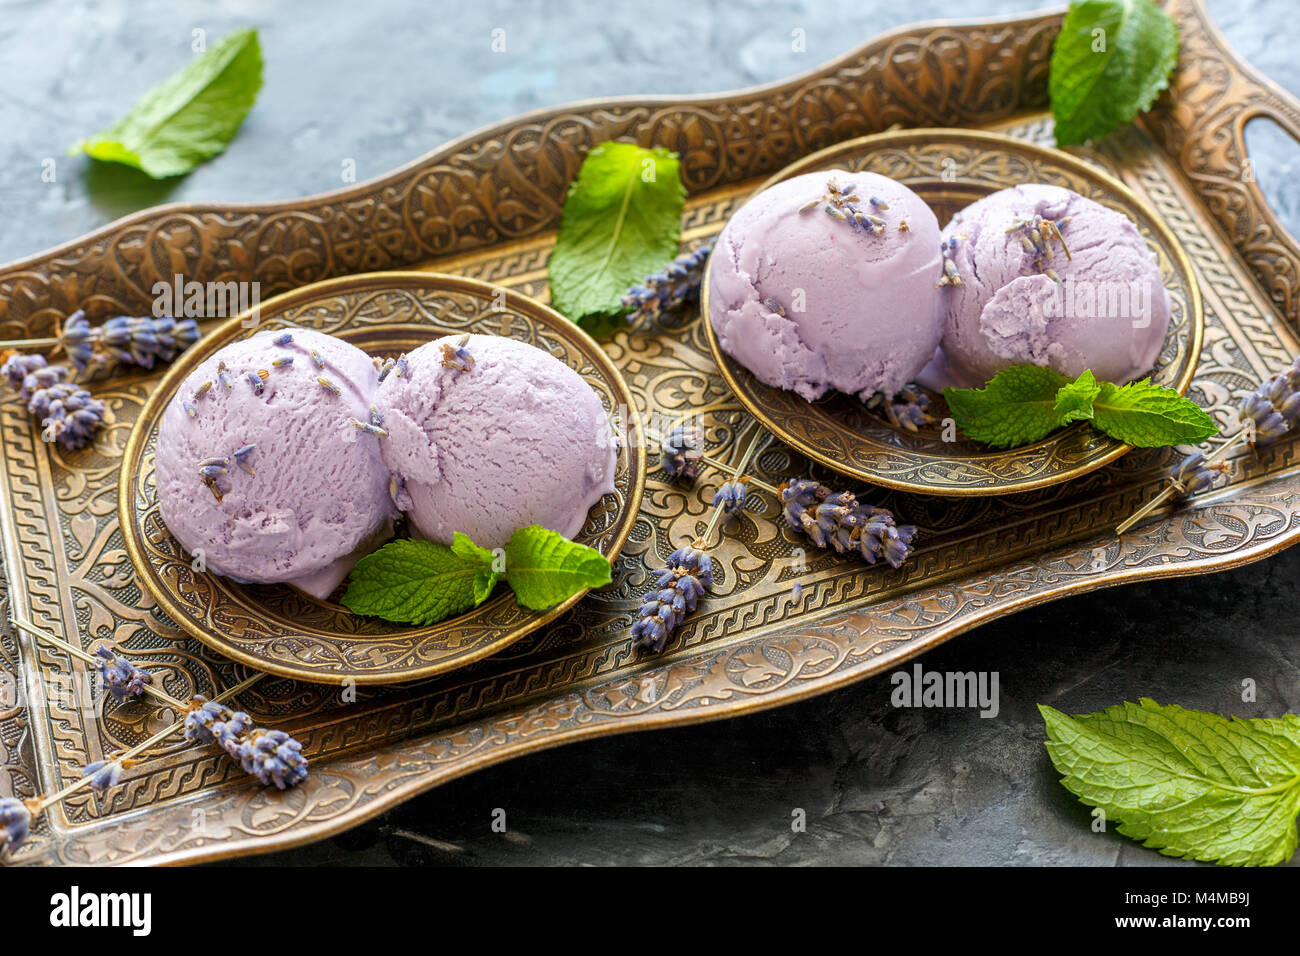 Balls of lavender ice cream and mint leaves. Stock Photo